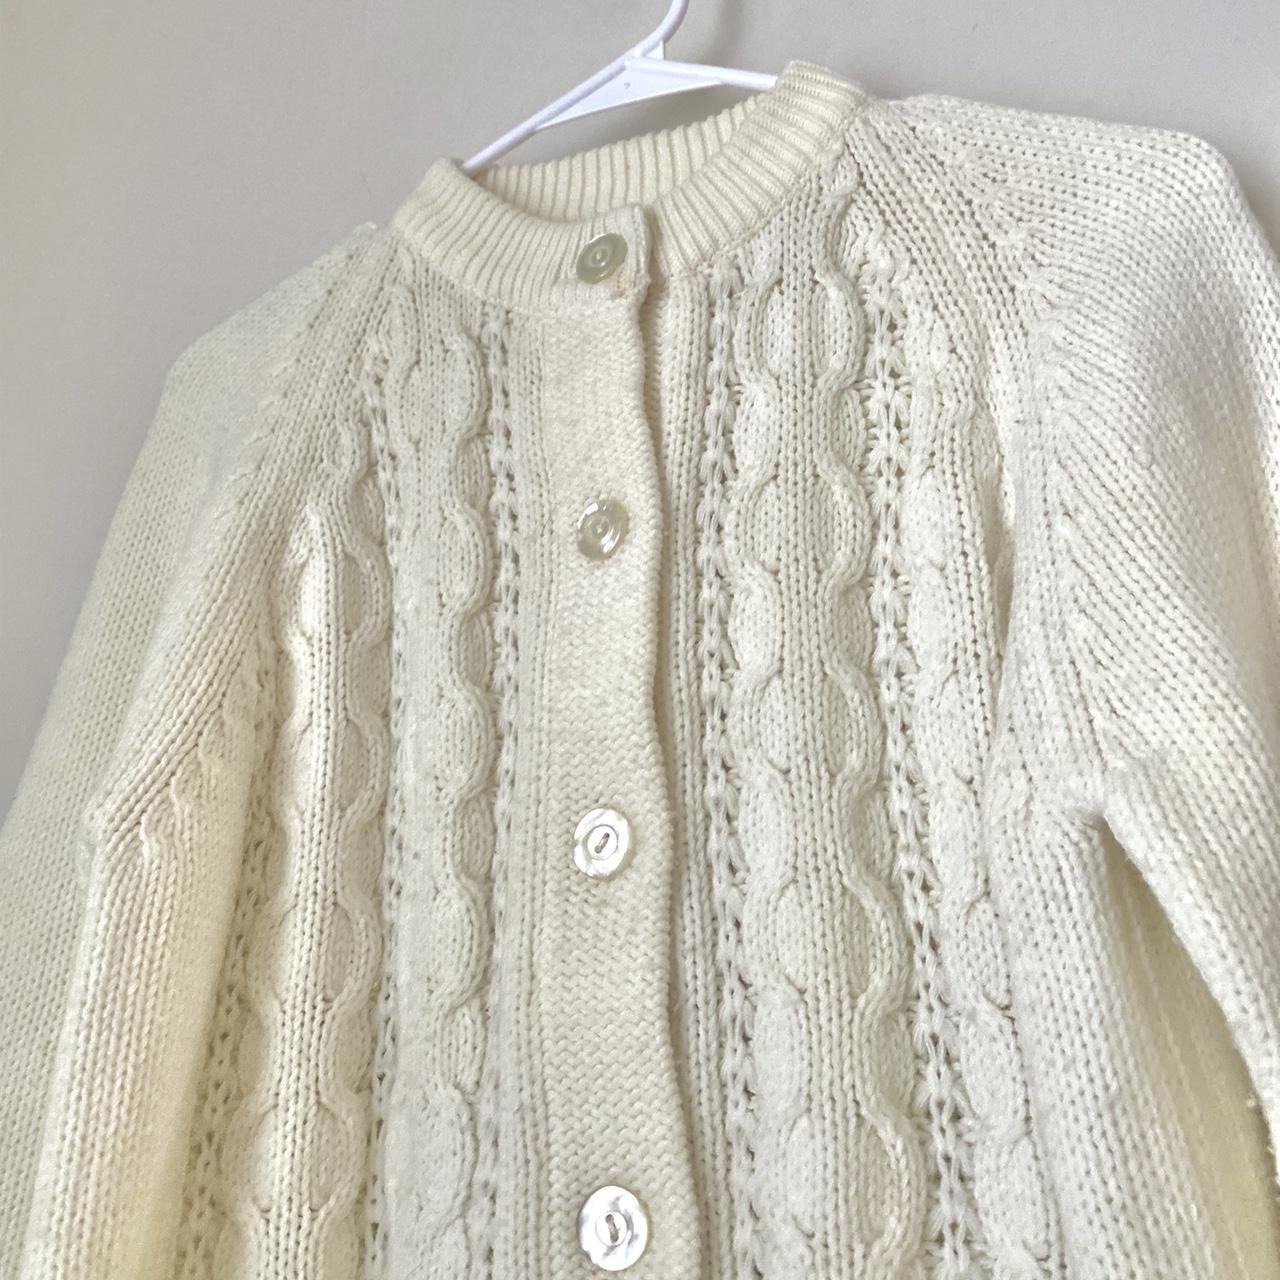 Cute off-white cable knit chunky sweater cardigan 🎀... - Depop